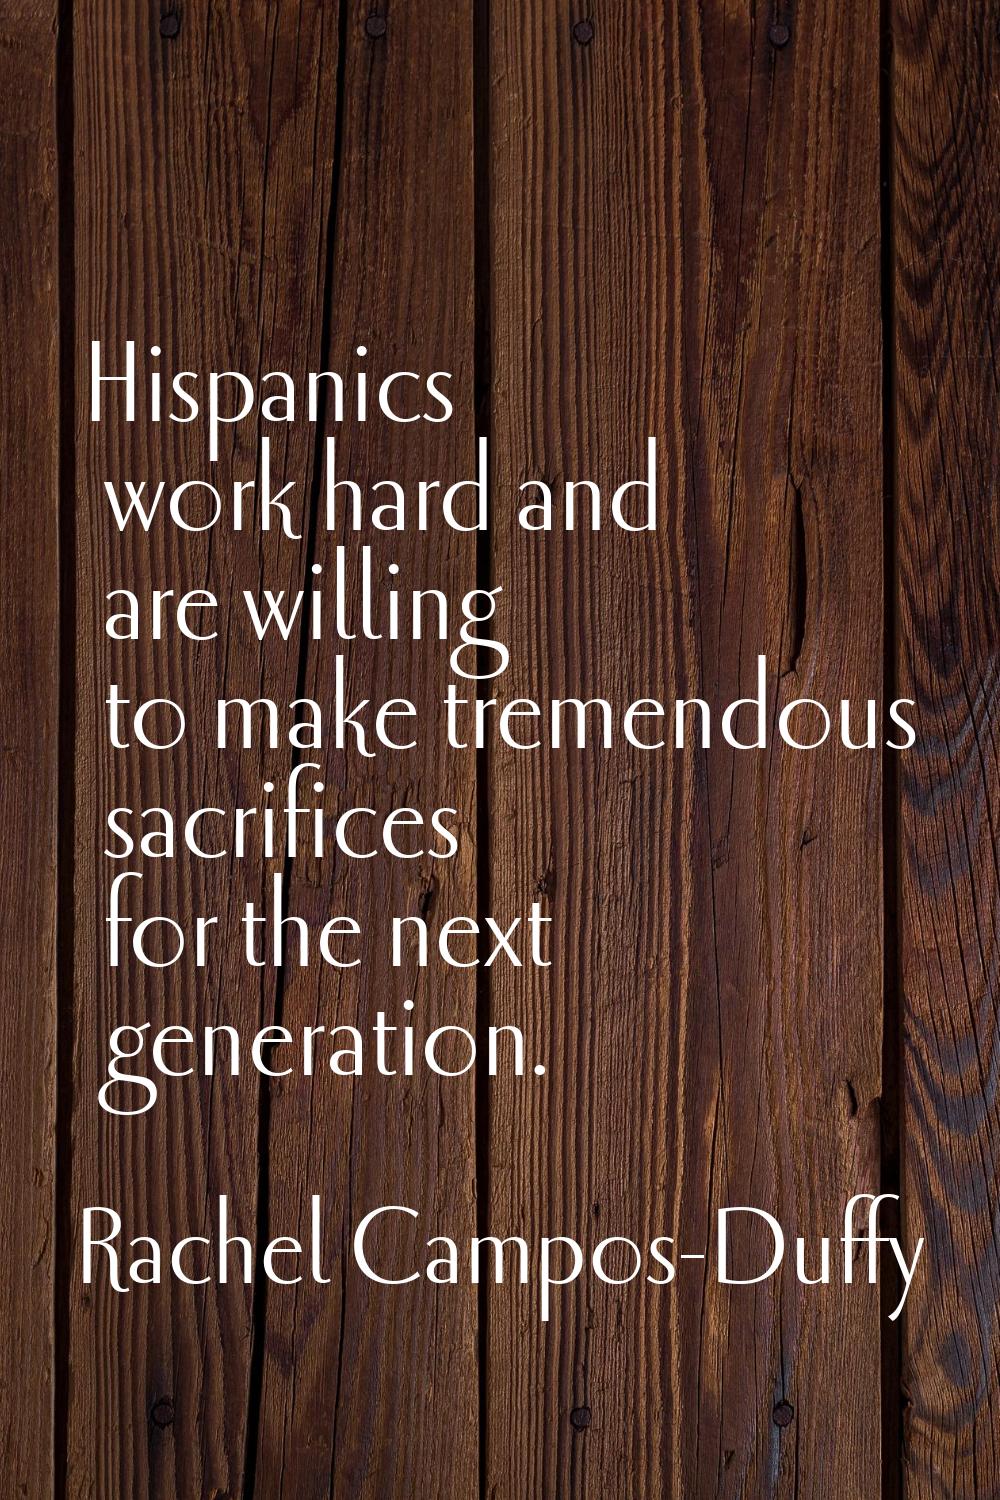 Hispanics work hard and are willing to make tremendous sacrifices for the next generation.